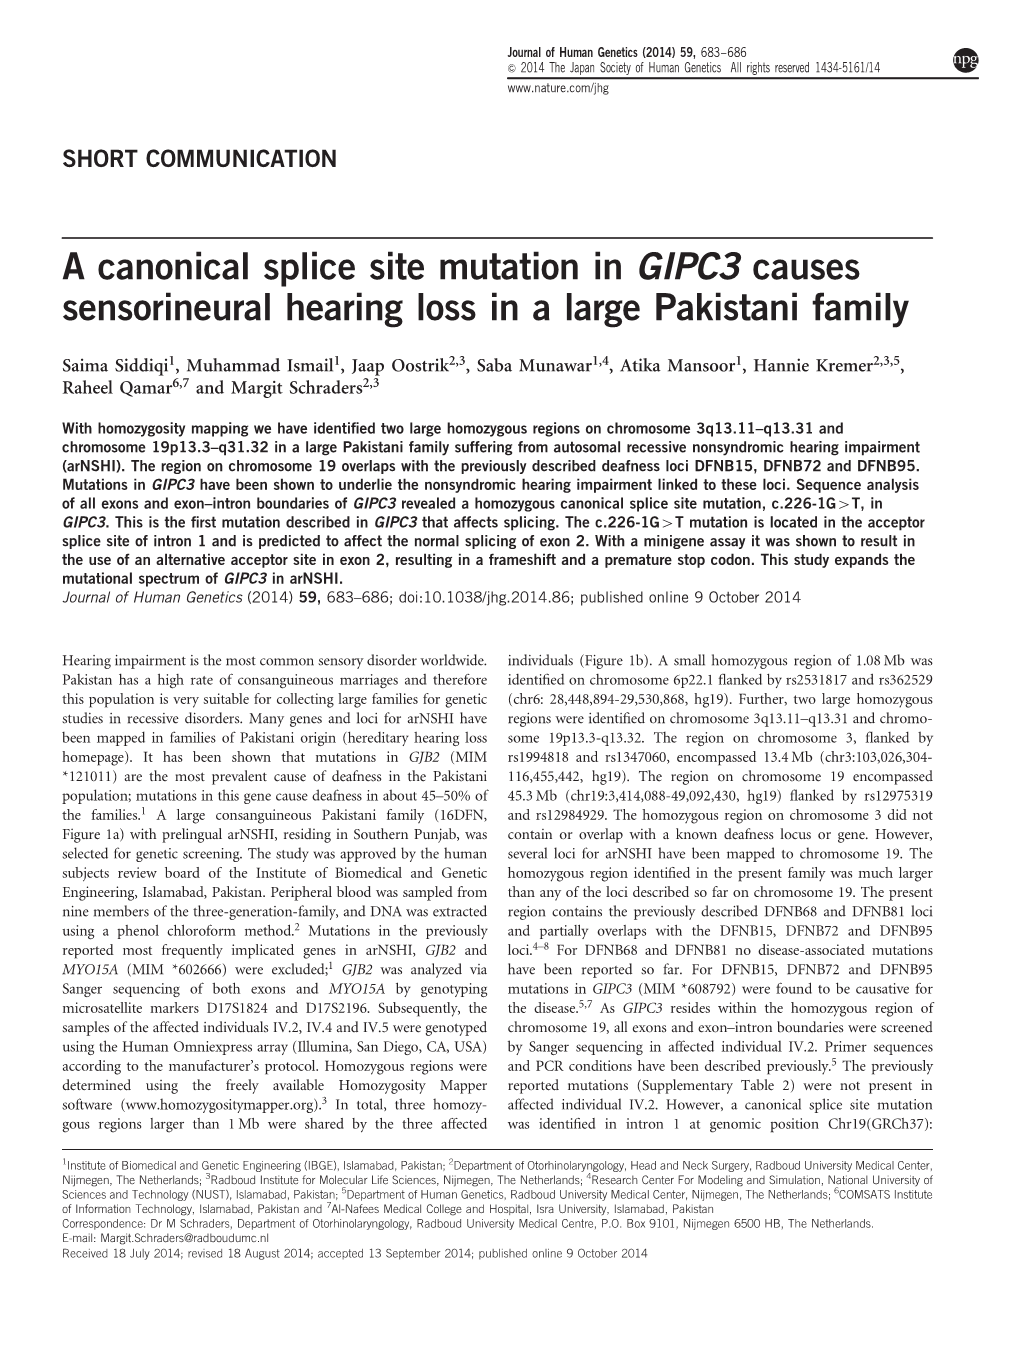 A Canonical Splice Site Mutation in GIPC3 Causes Sensorineural Hearing Loss in a Large Pakistani Family